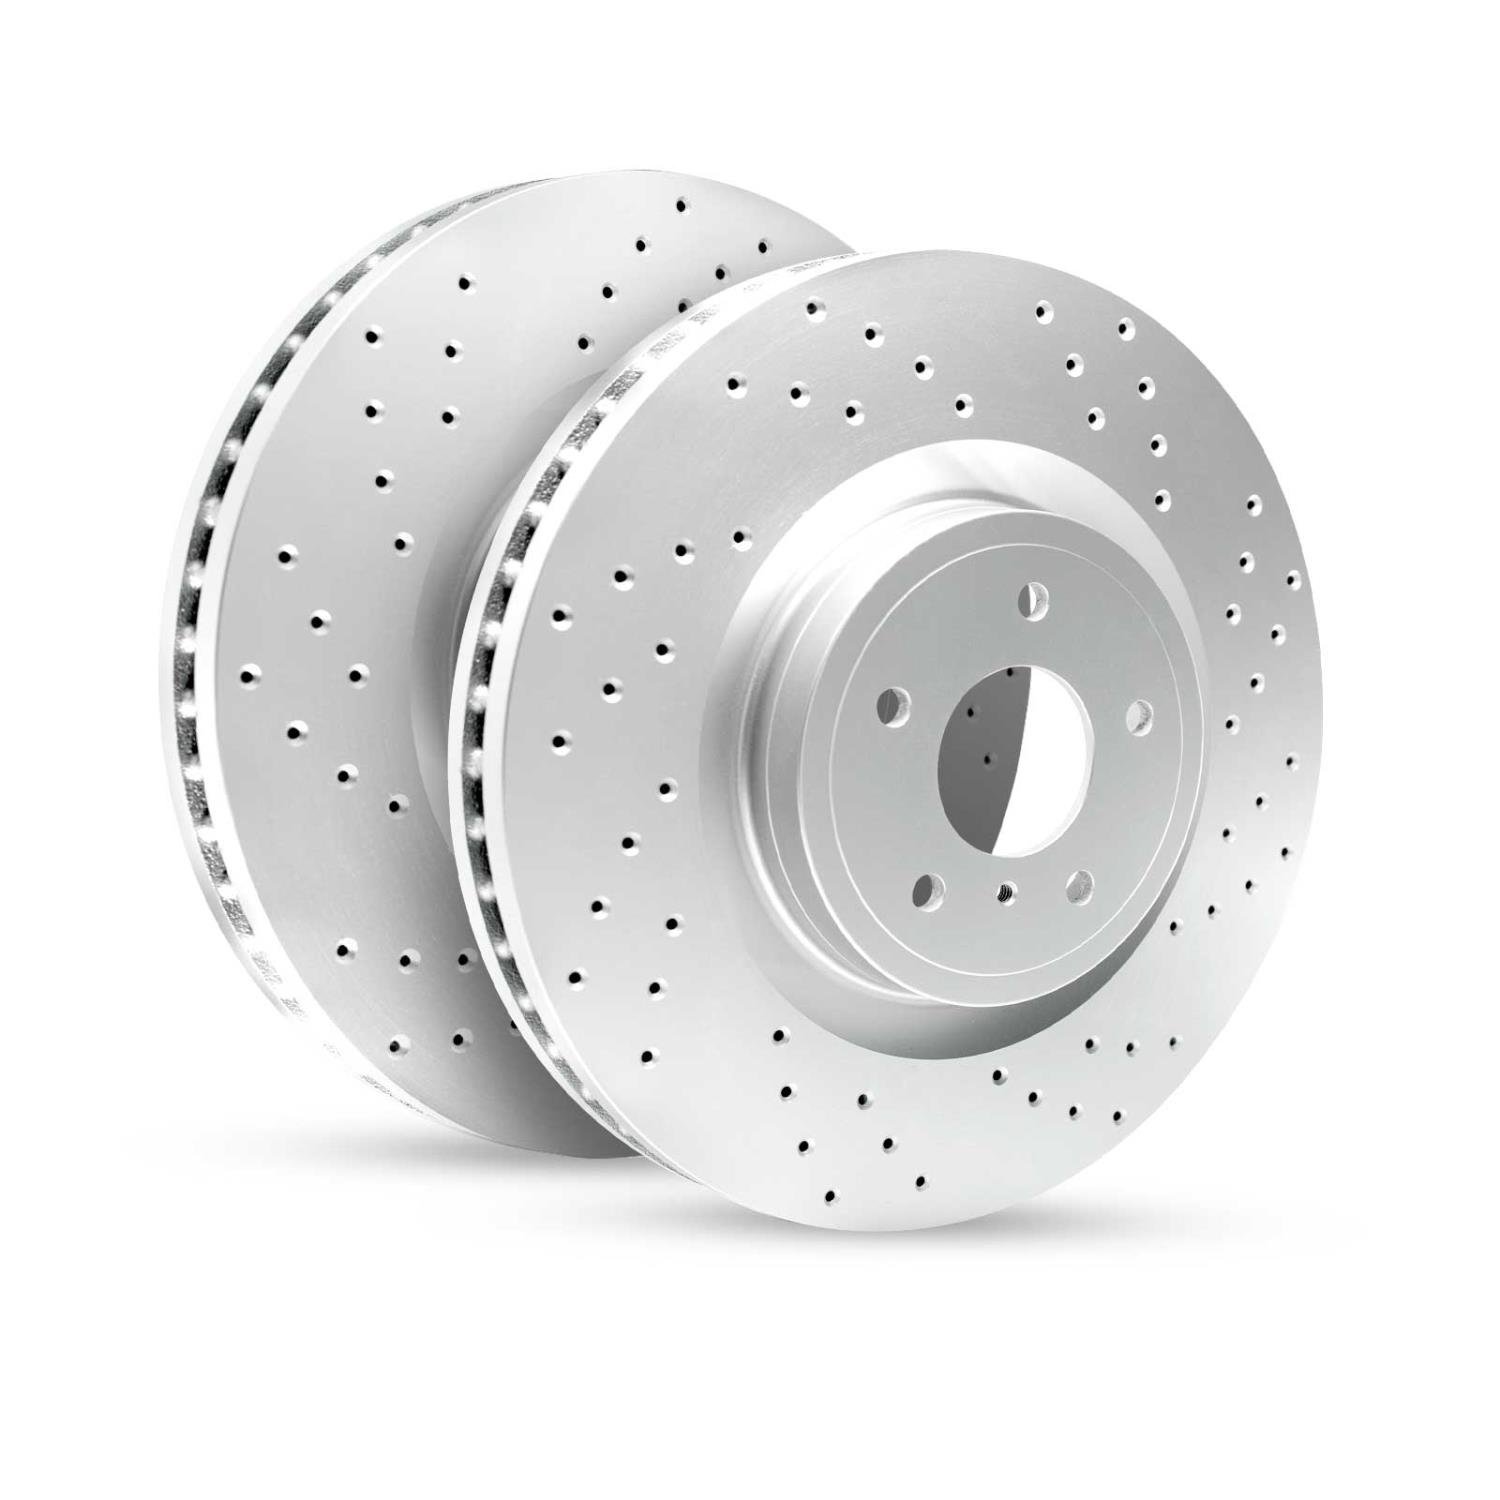 GEO-Carbon Drilled/Slotted Rotors, 2015-2020 Fits Multiple